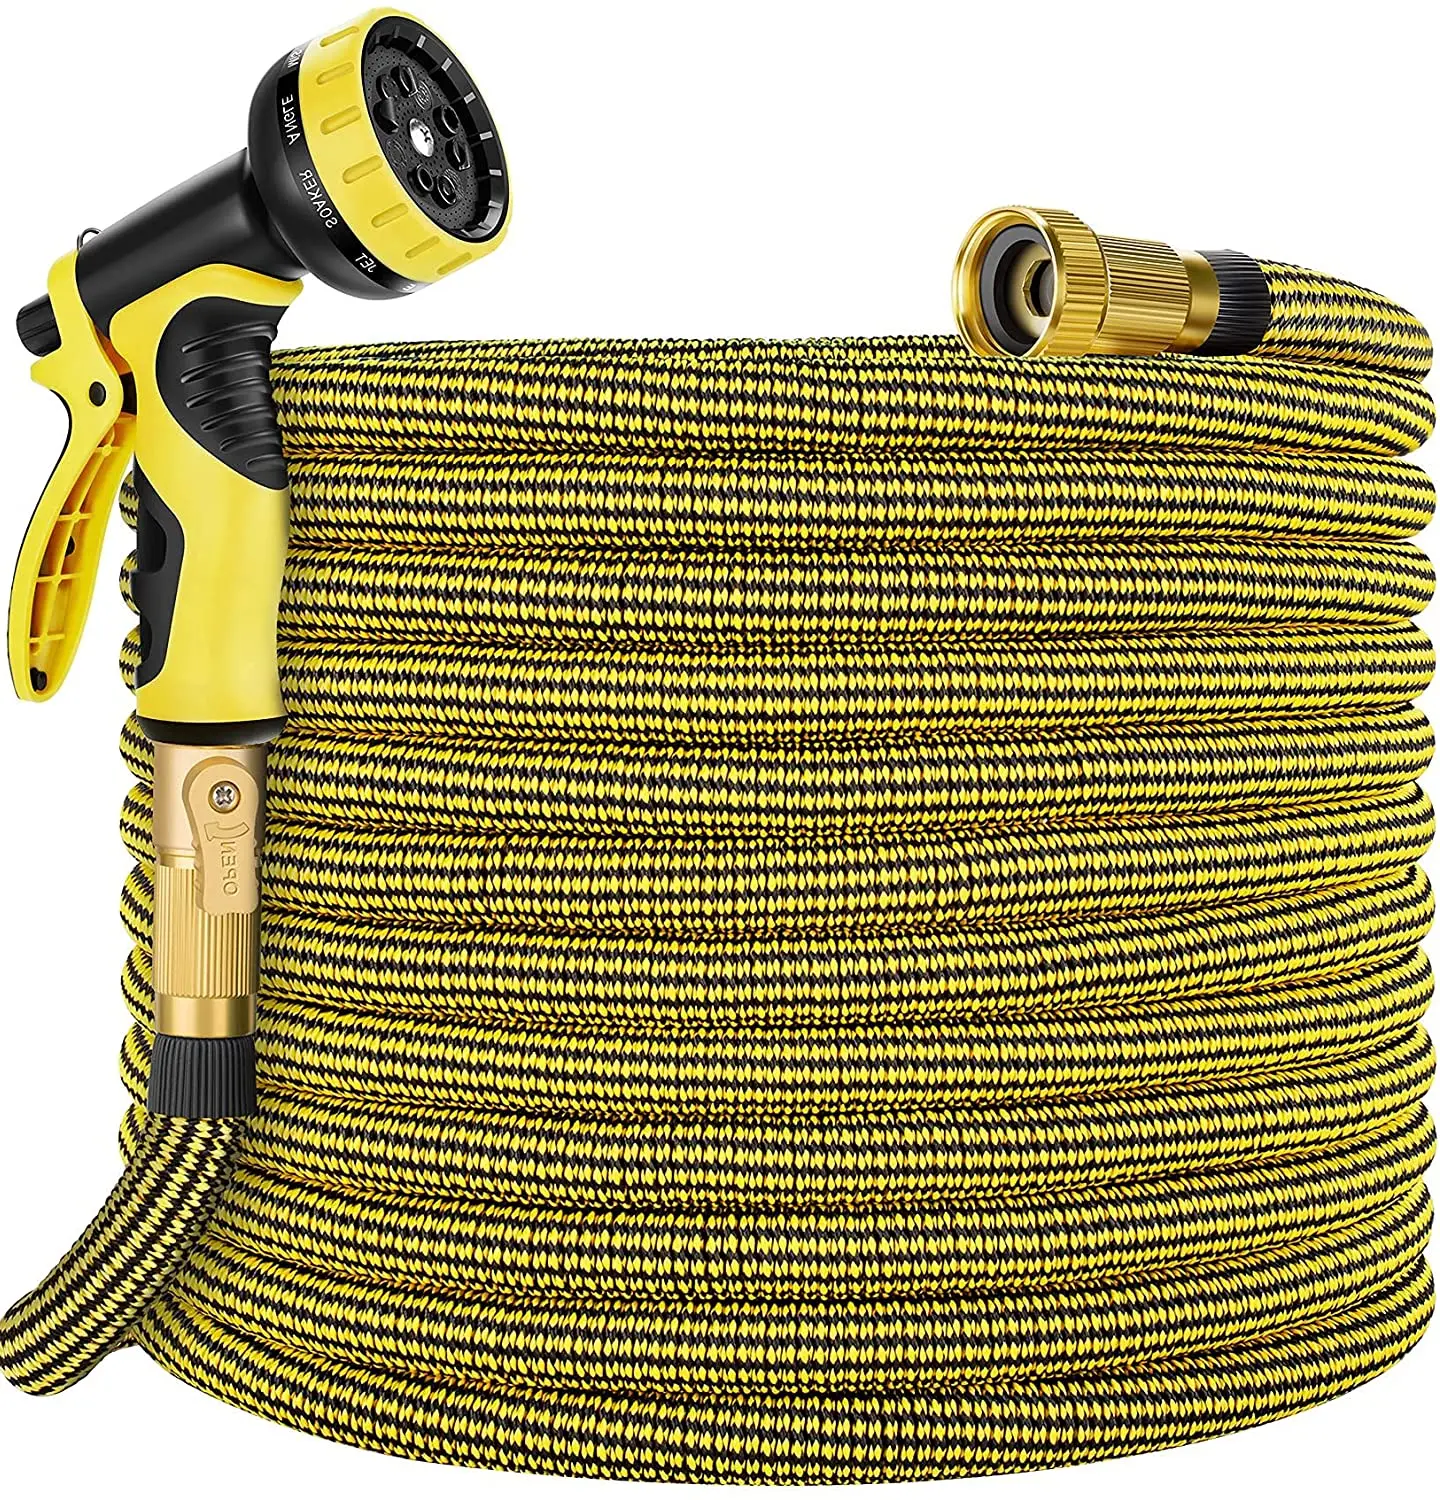 

Finesource Storage Rack Expandable Magic Flexible Water Hose 50 Ft Extra Strength Fabric With 8 Function Spray Nozzle, Customized color accetable